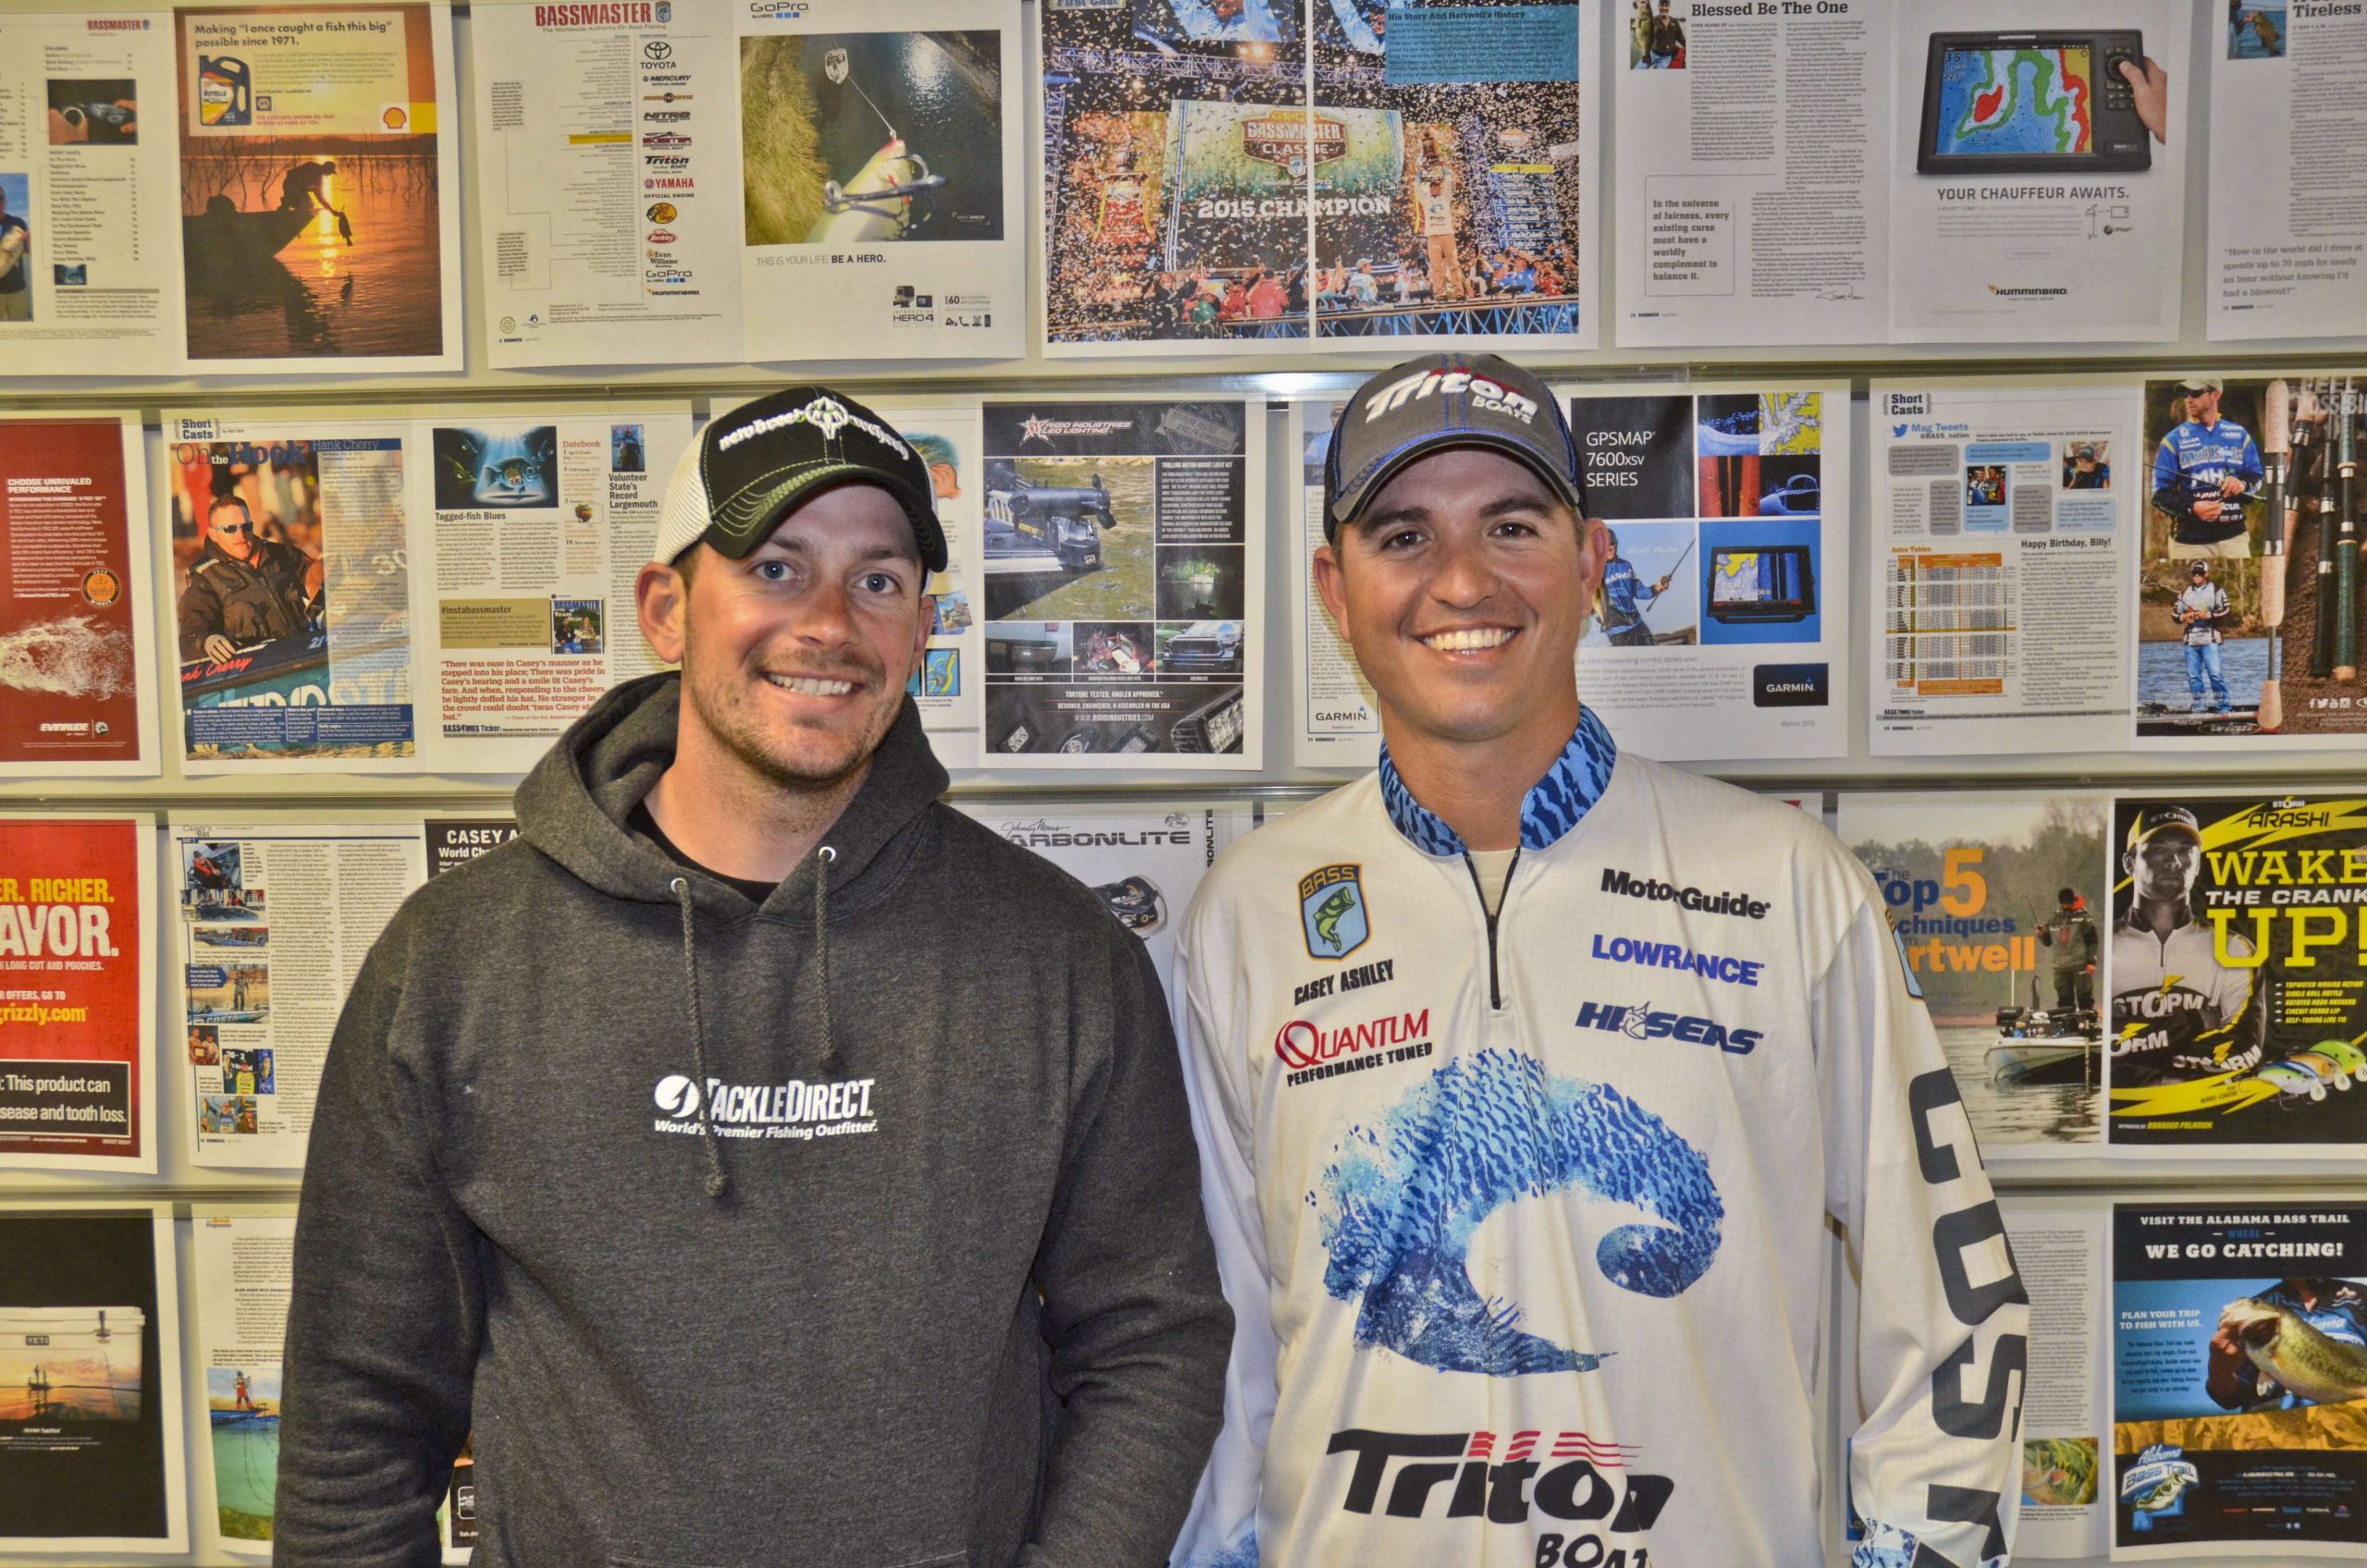 As an extra bonus, B.A.S.S. staff have the rare occurrence of having two Bassmaster Elite Series pros in the office at once when David Mullins stopped in for a visit with a writer.